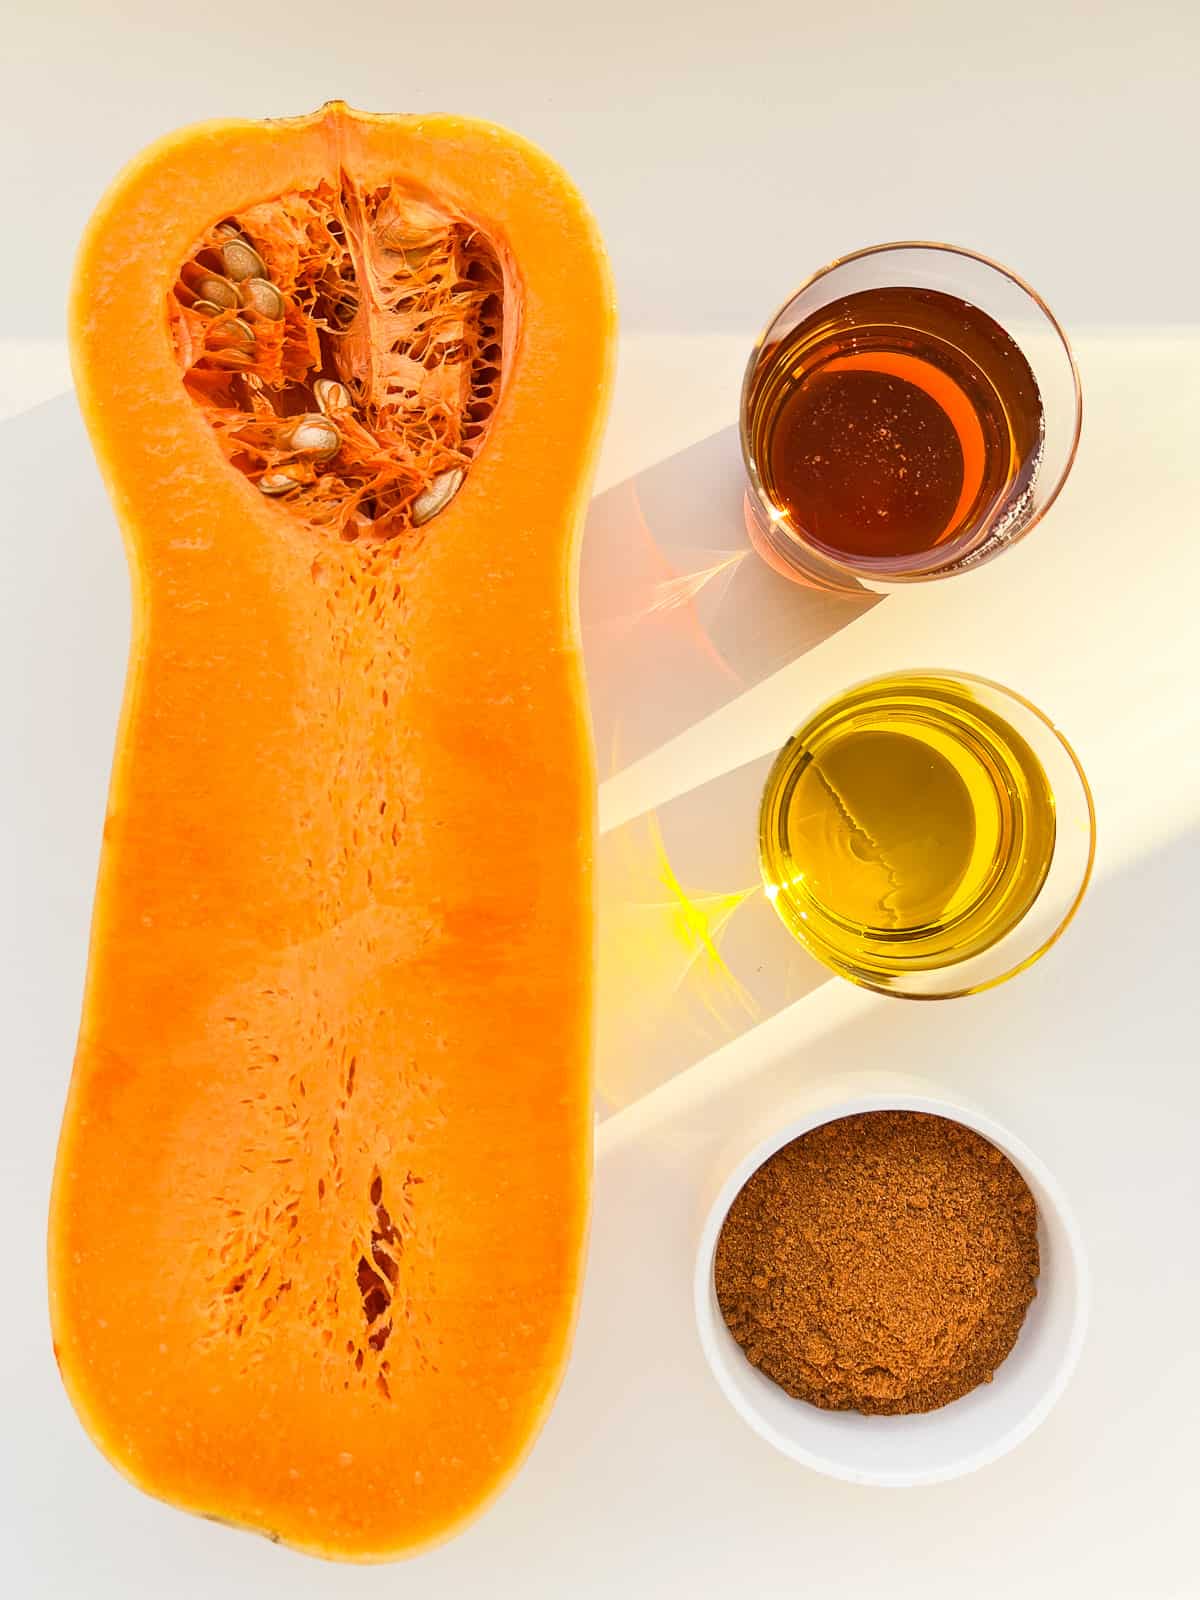 An image of butternut squash and spices.